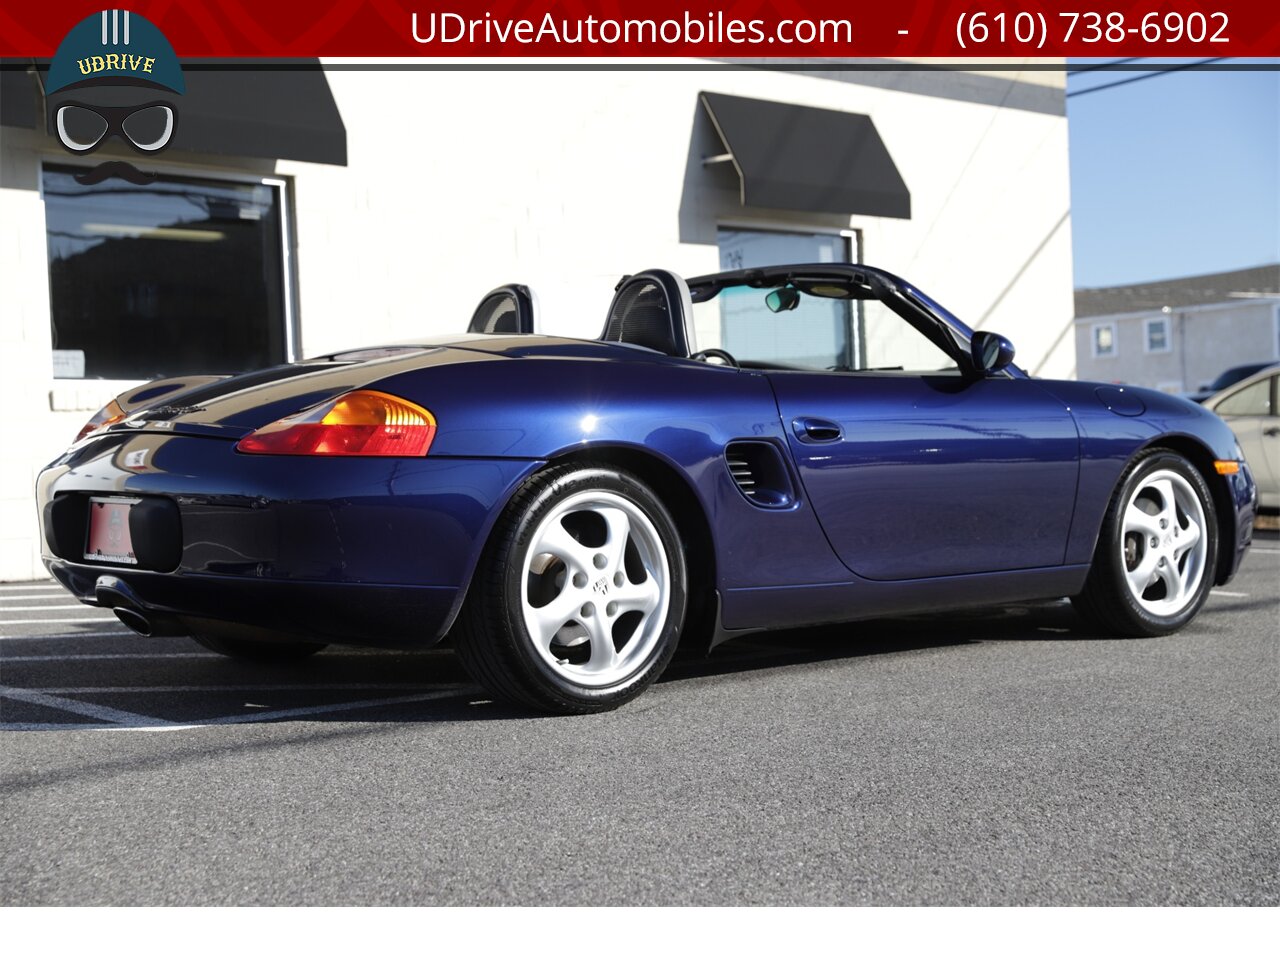 2001 Porsche Boxster 5 Speed Manual Detailed Service History  Same Owner for Last 18 Years Hard Top Included - Photo 15 - West Chester, PA 19382